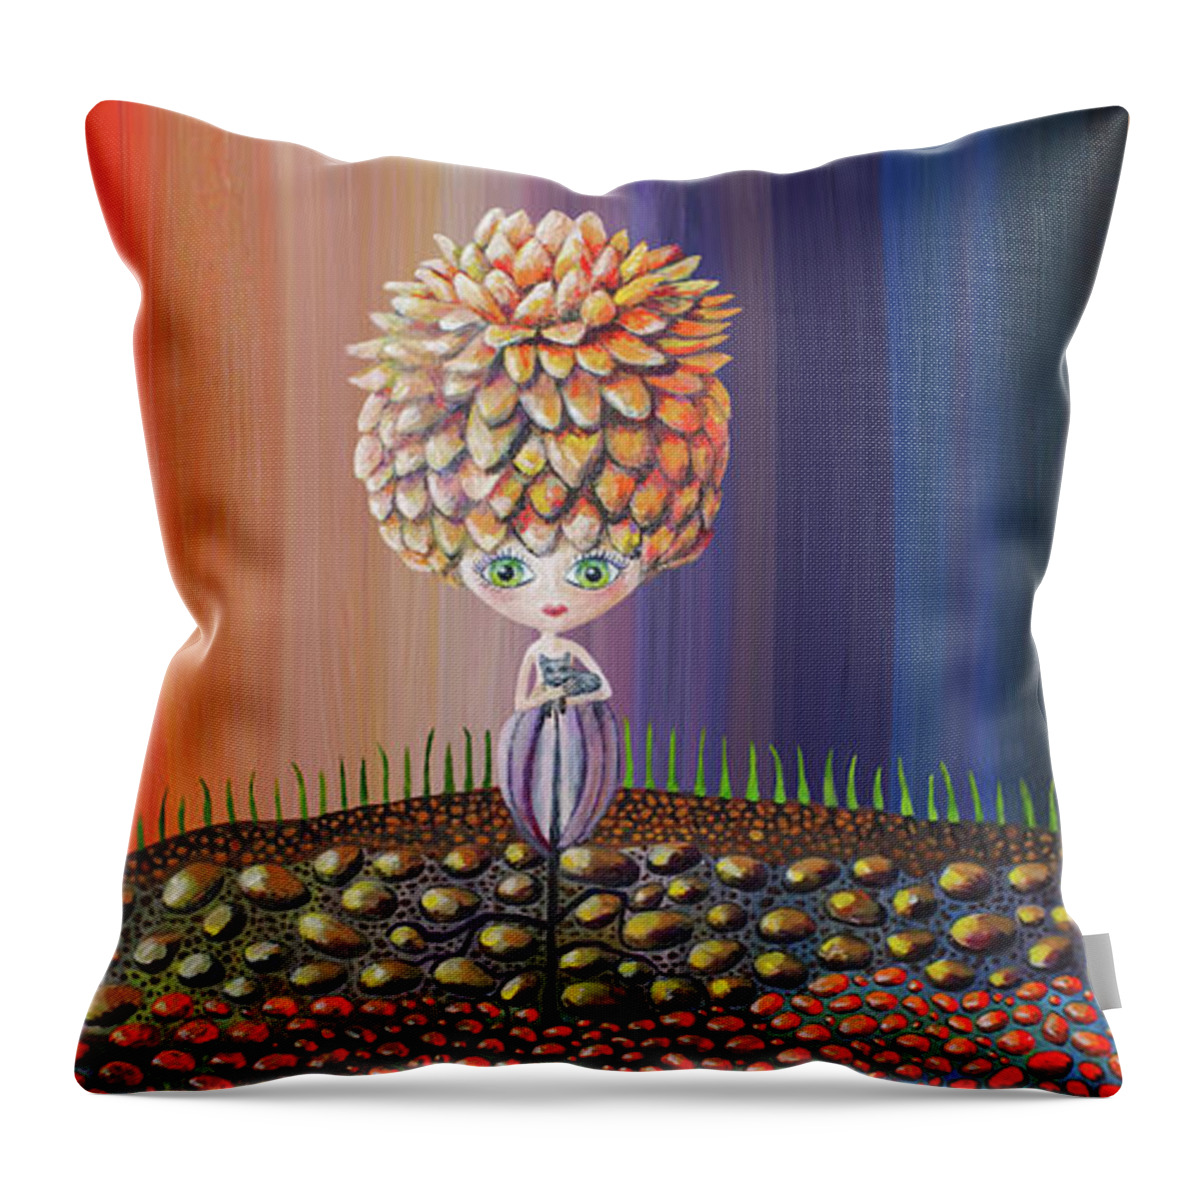 Popsurrealism Throw Pillow featuring the painting Unplucked by Mindy Huntress